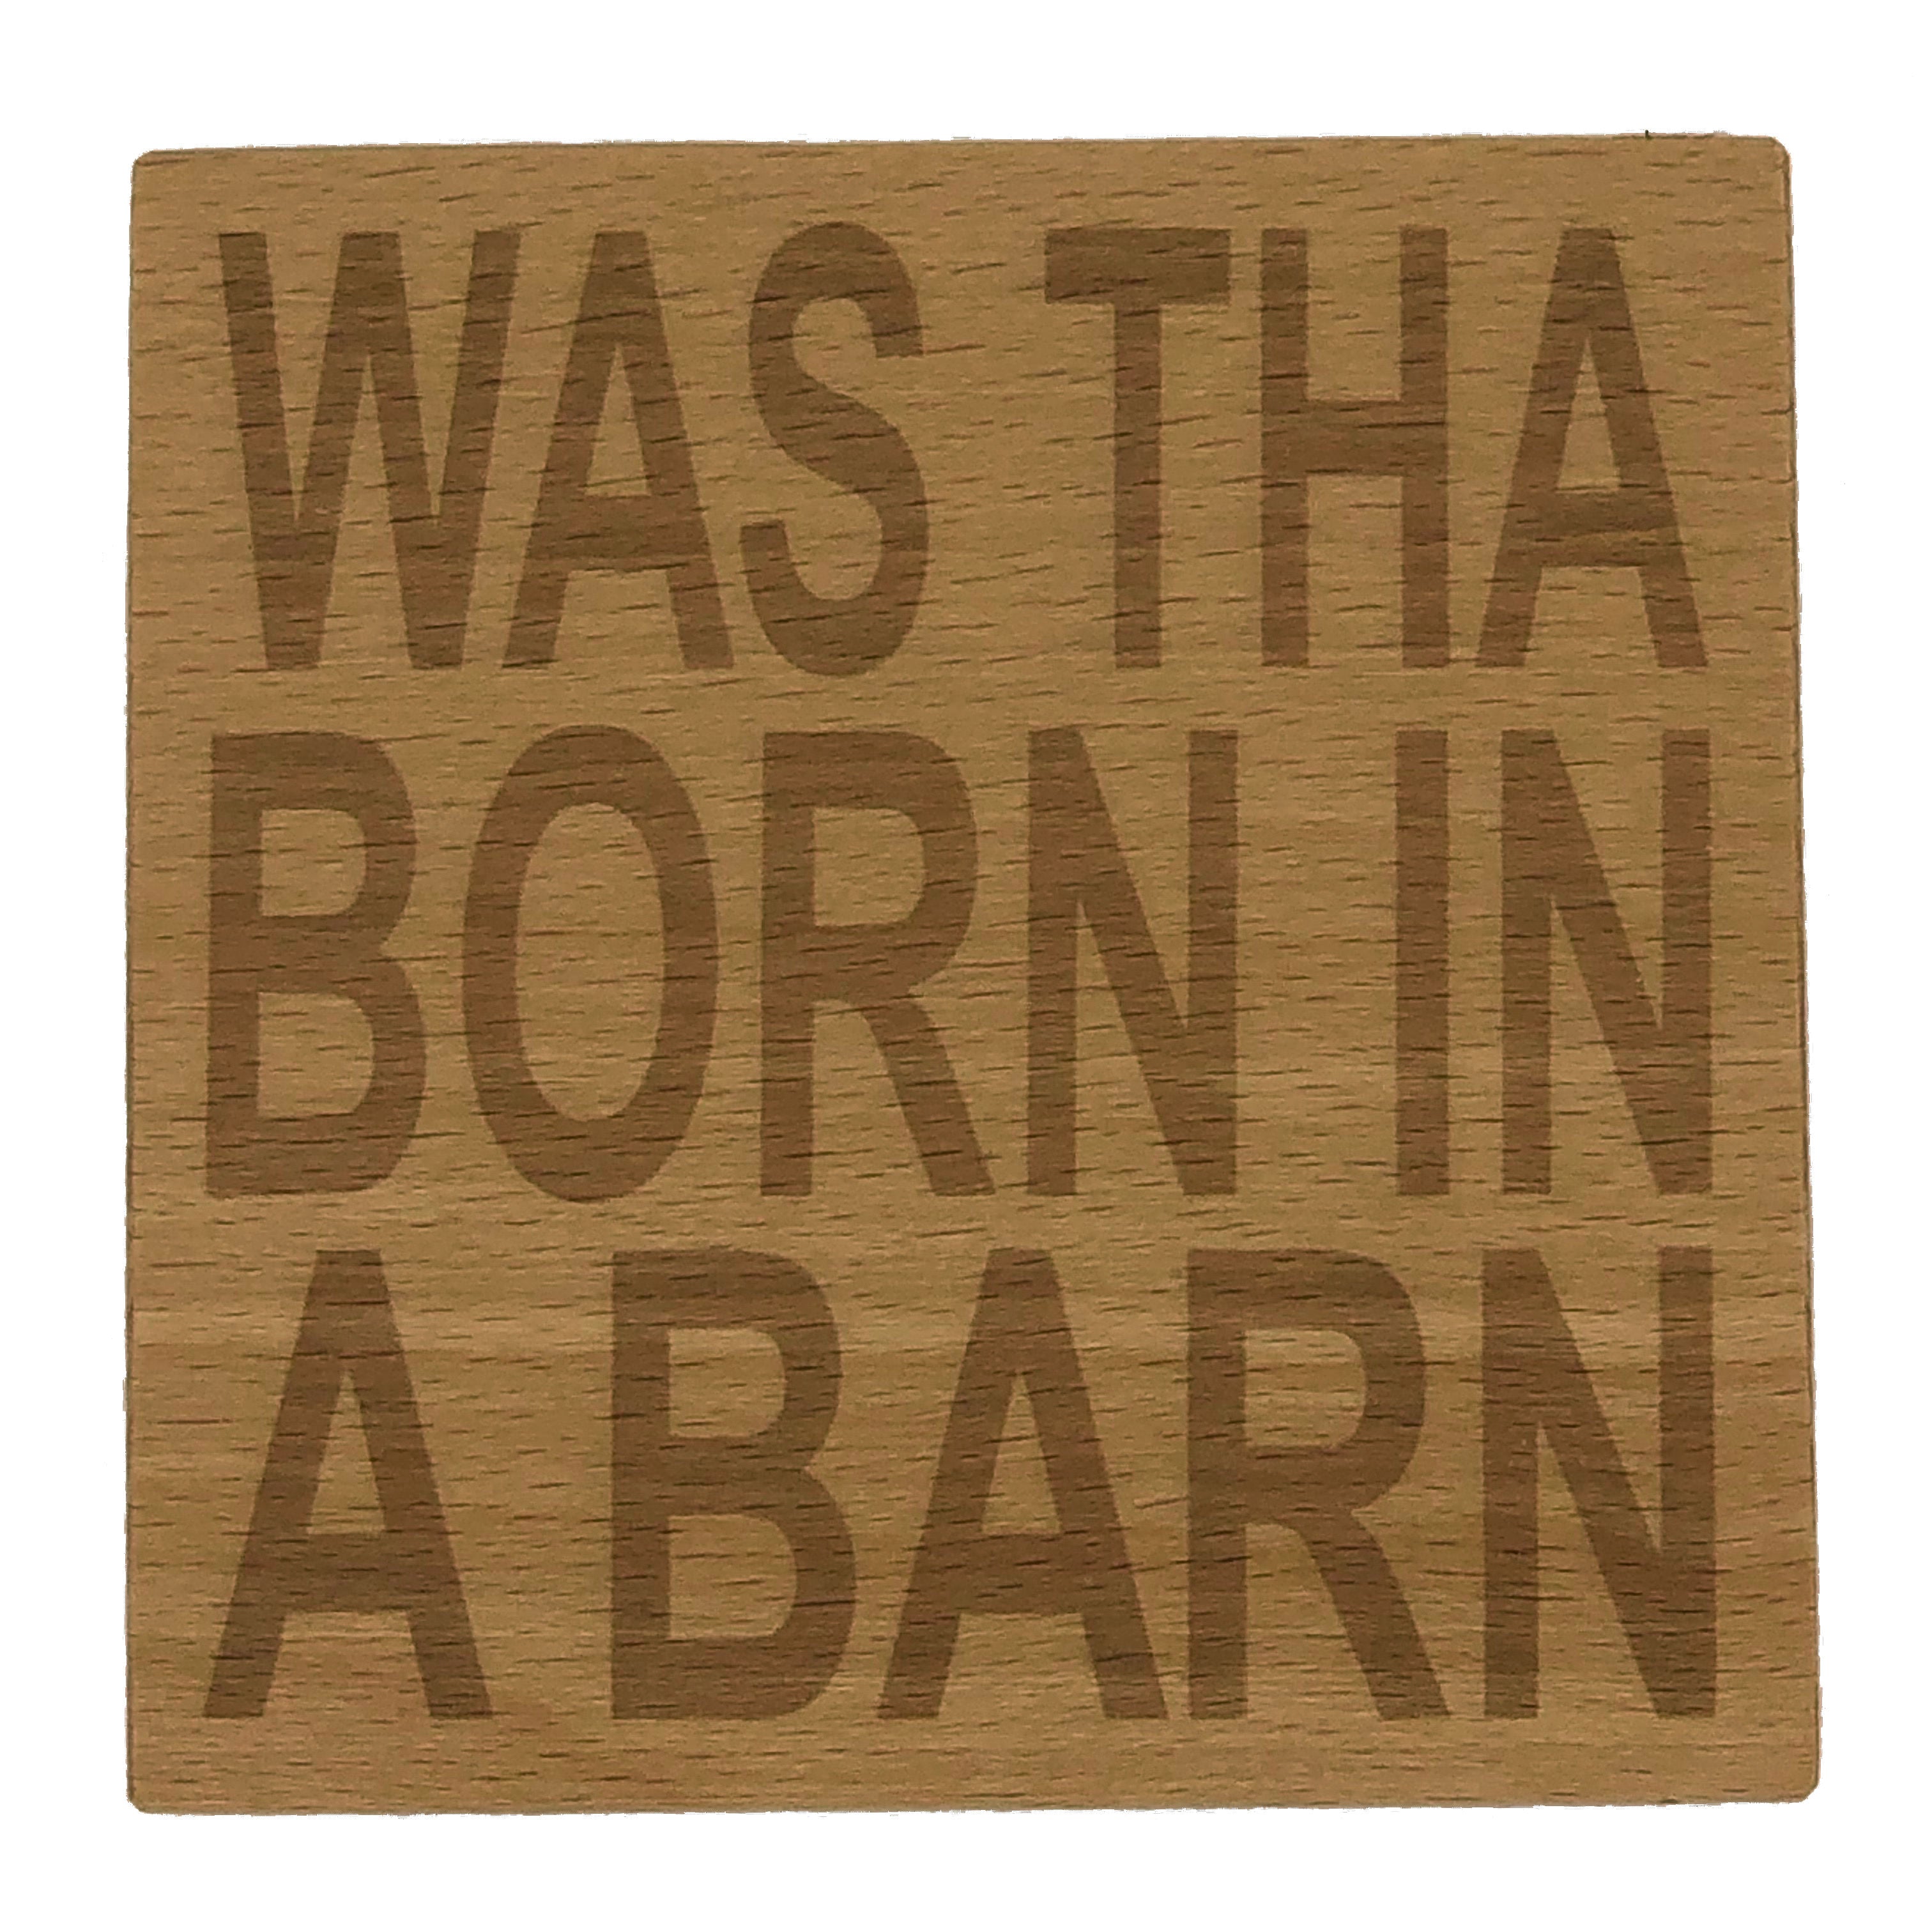 Wooden coaster - Northern banter - was tha' born in a barn?